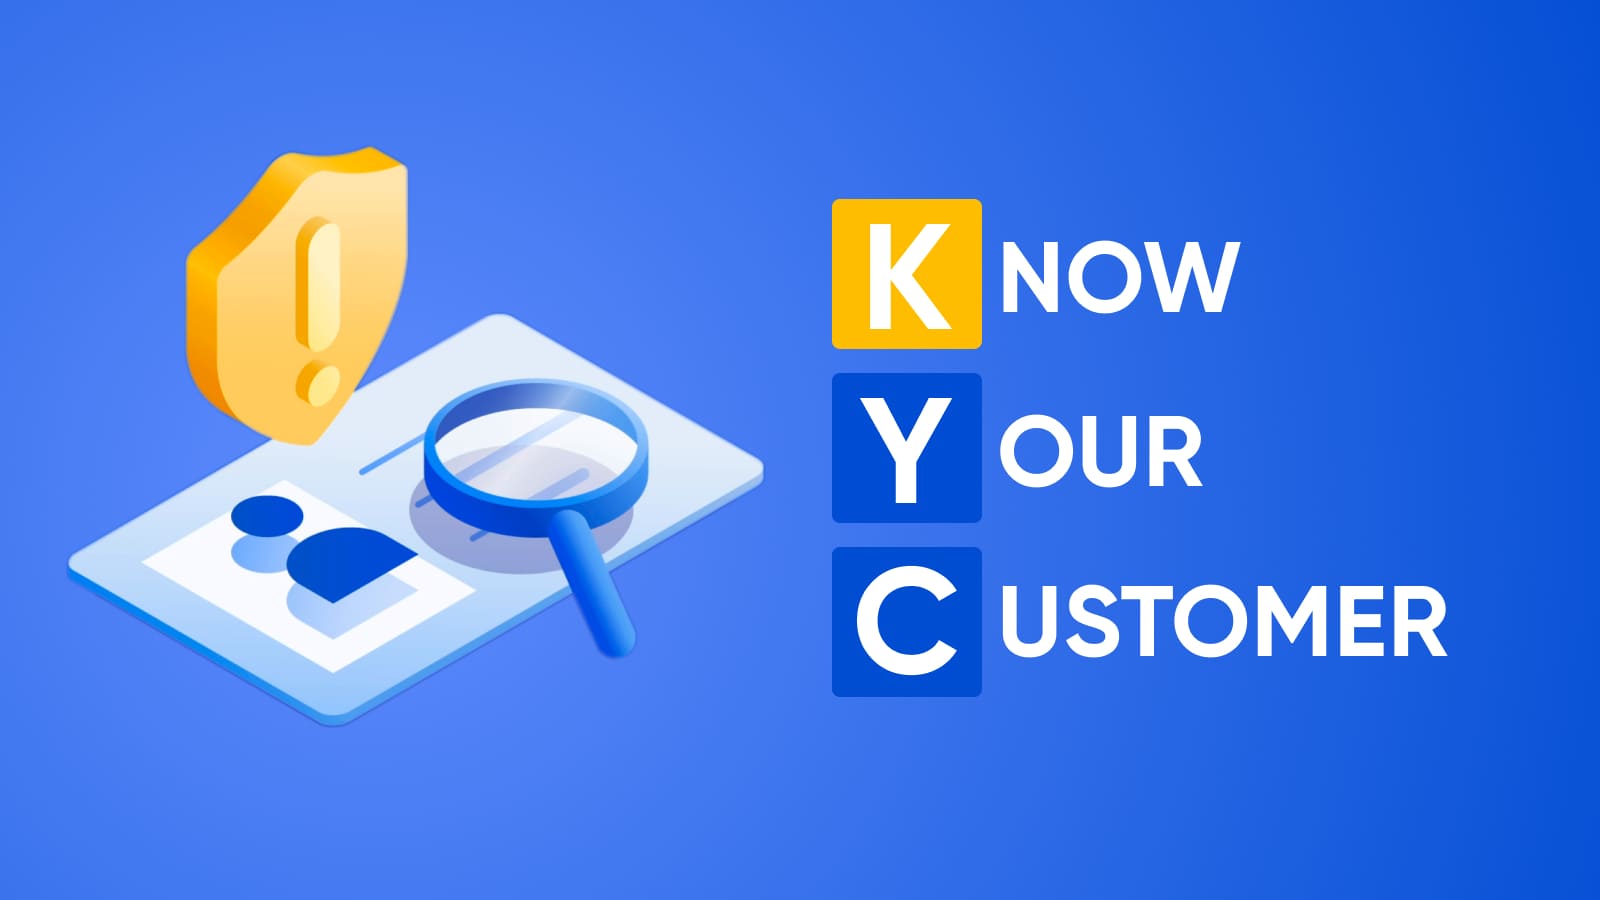 To combat money laundering, KYC checks are required in regulated markets.